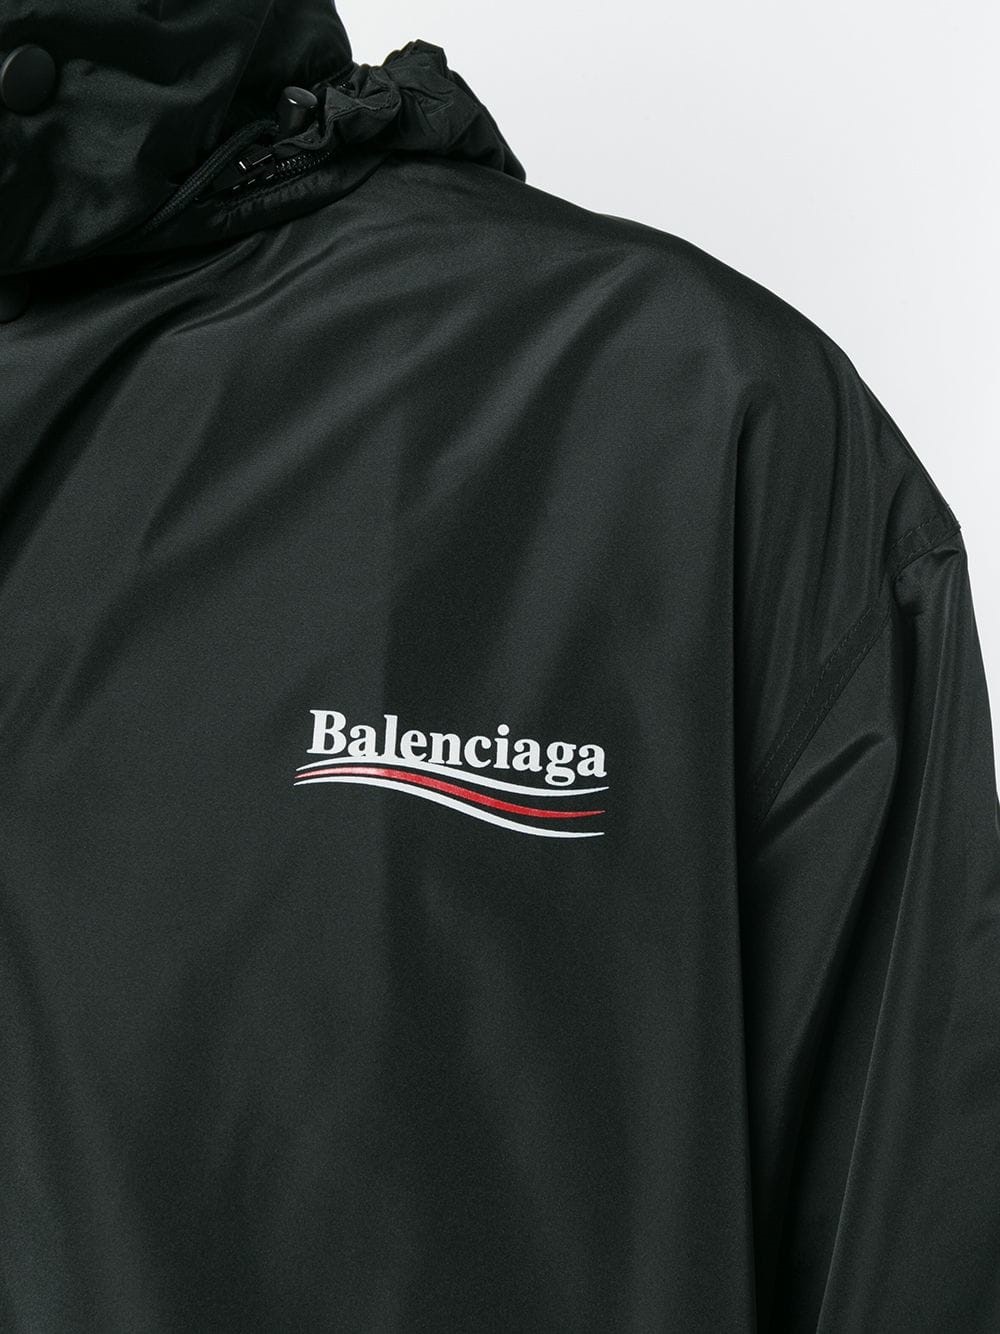 Balenciaga Logo Collar Leather Jacket with Genuine Shearling Lining   Nordstrom